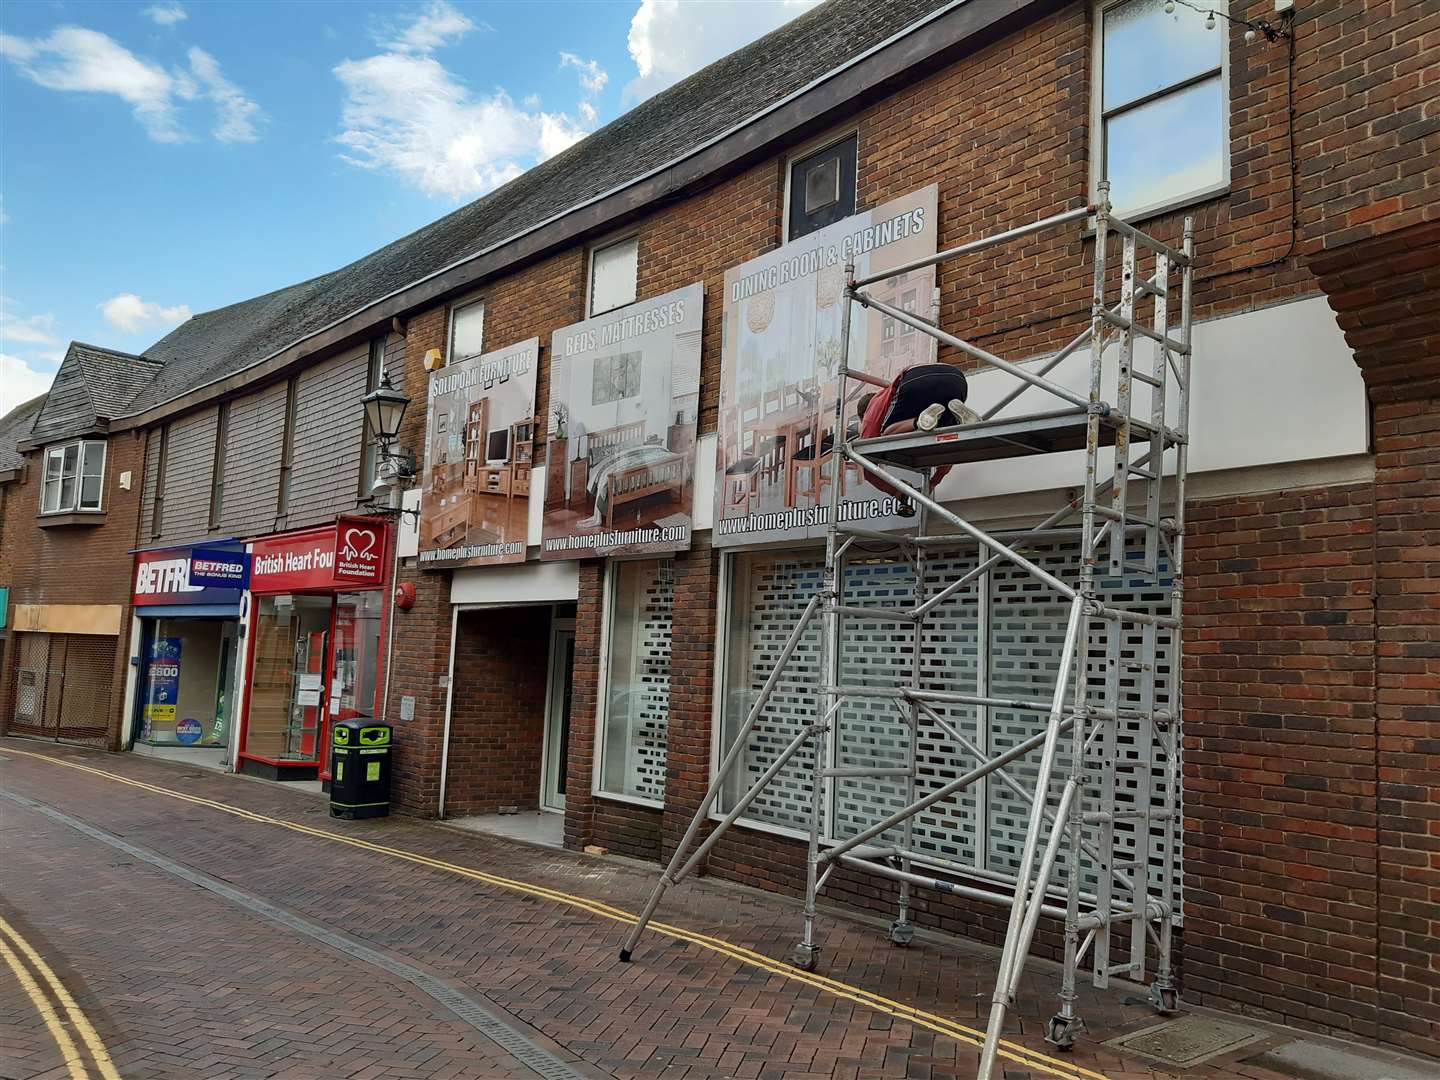 The former Argos site in New Rents is to become a HomePlus store